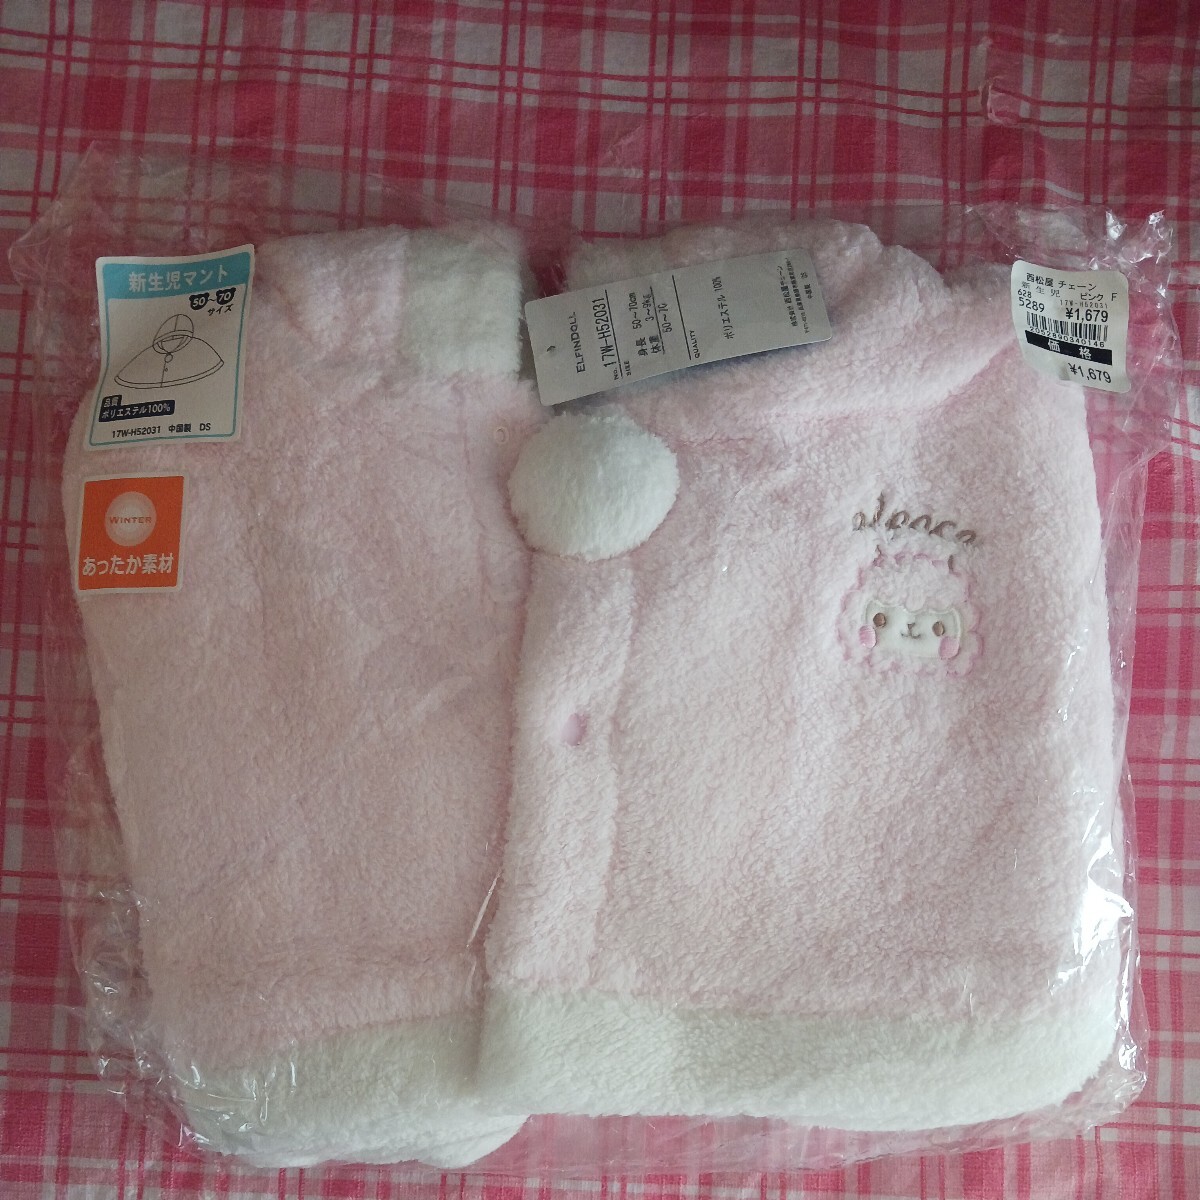  newborn baby mantle 50~70. protection against cold pink newborn baby mantle protection against cold west pine shop baby baby newborn baby mantle outfit for cold weather autumn thing ear attaching hood hood mantle 